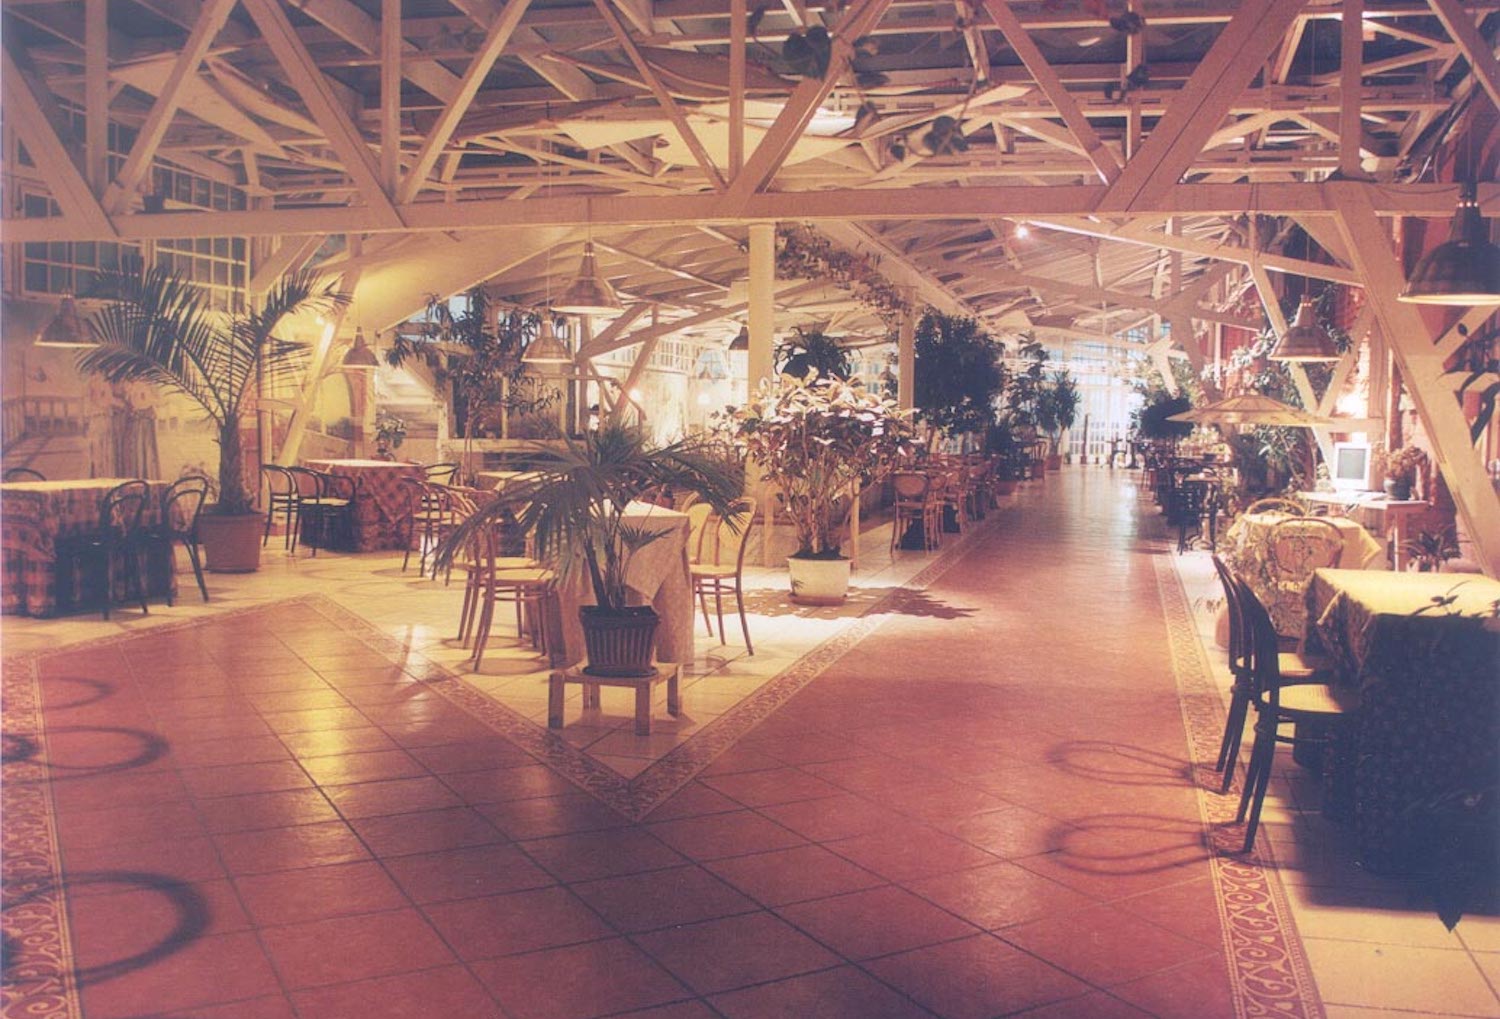 A view of the greenhouse around 1998